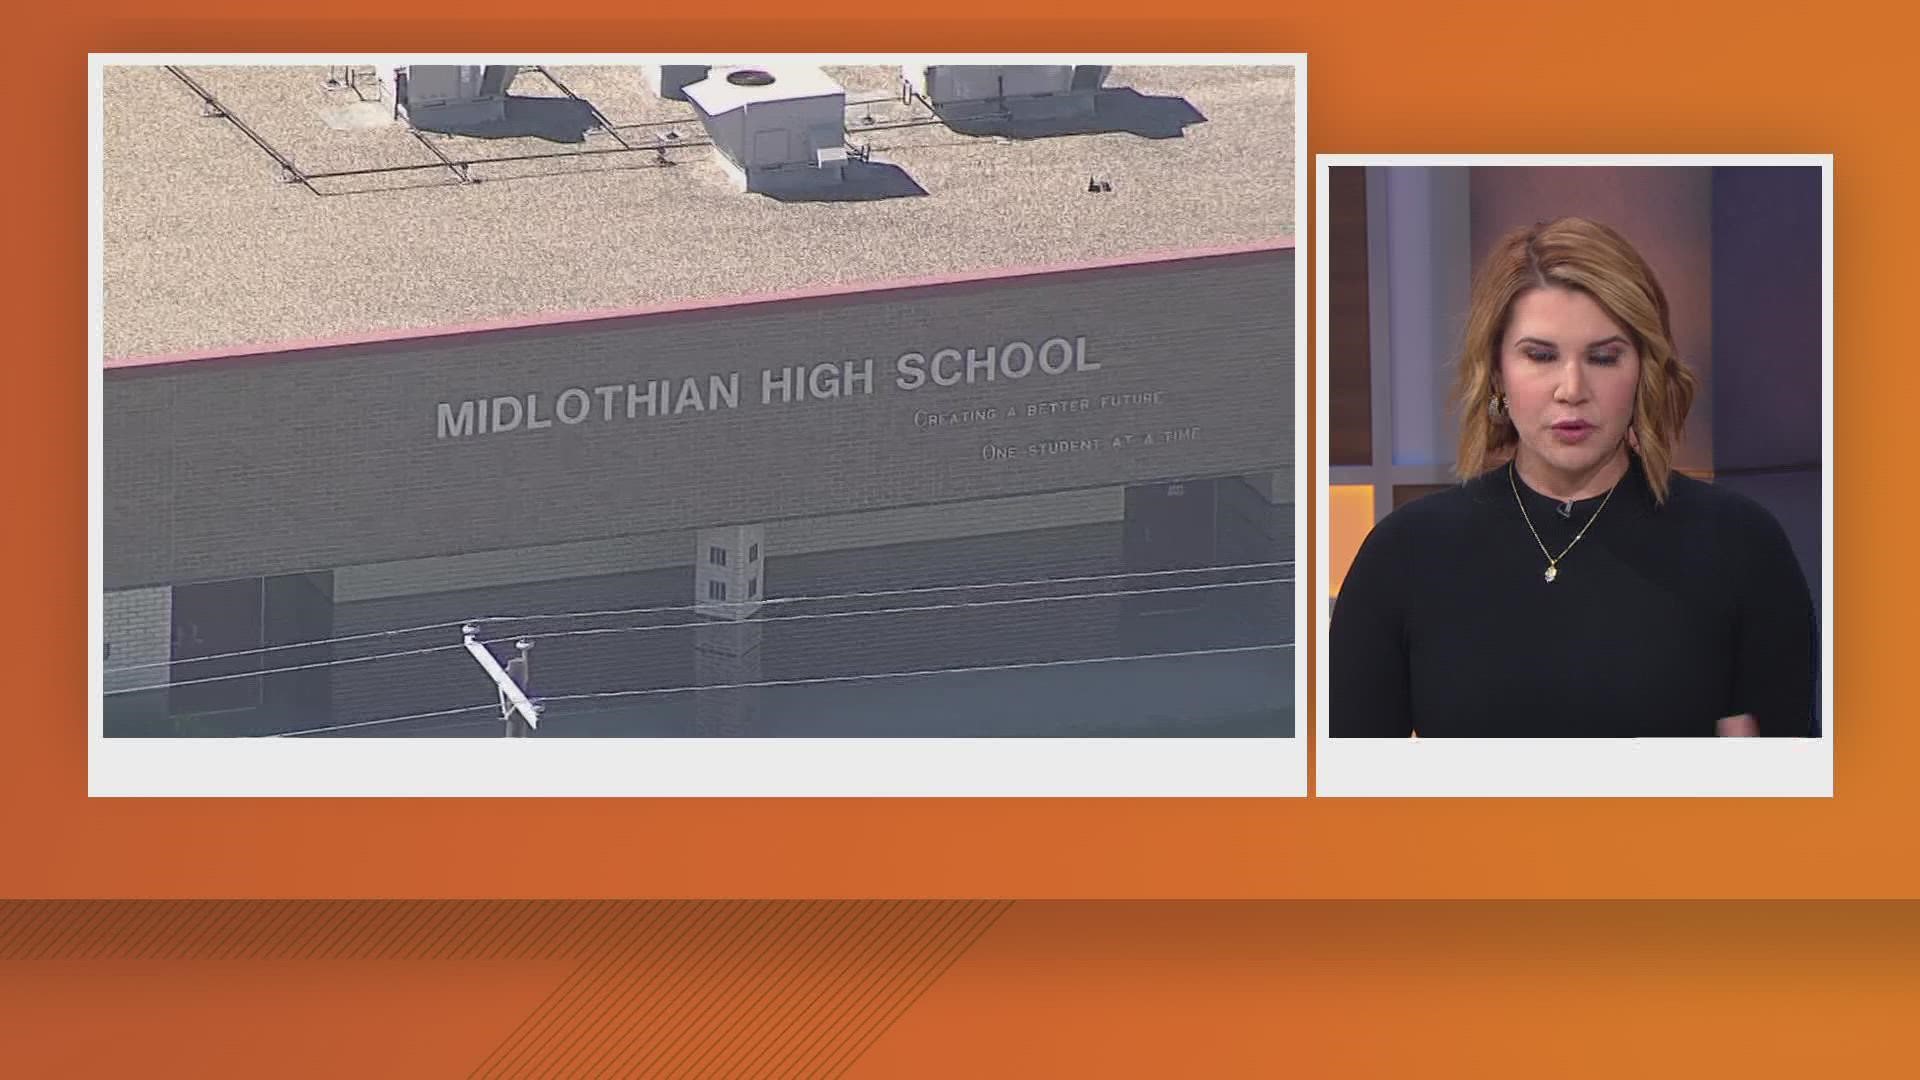 Midlothian ISD said the staff “acted immediately” to keep students safe when the threat was reported.